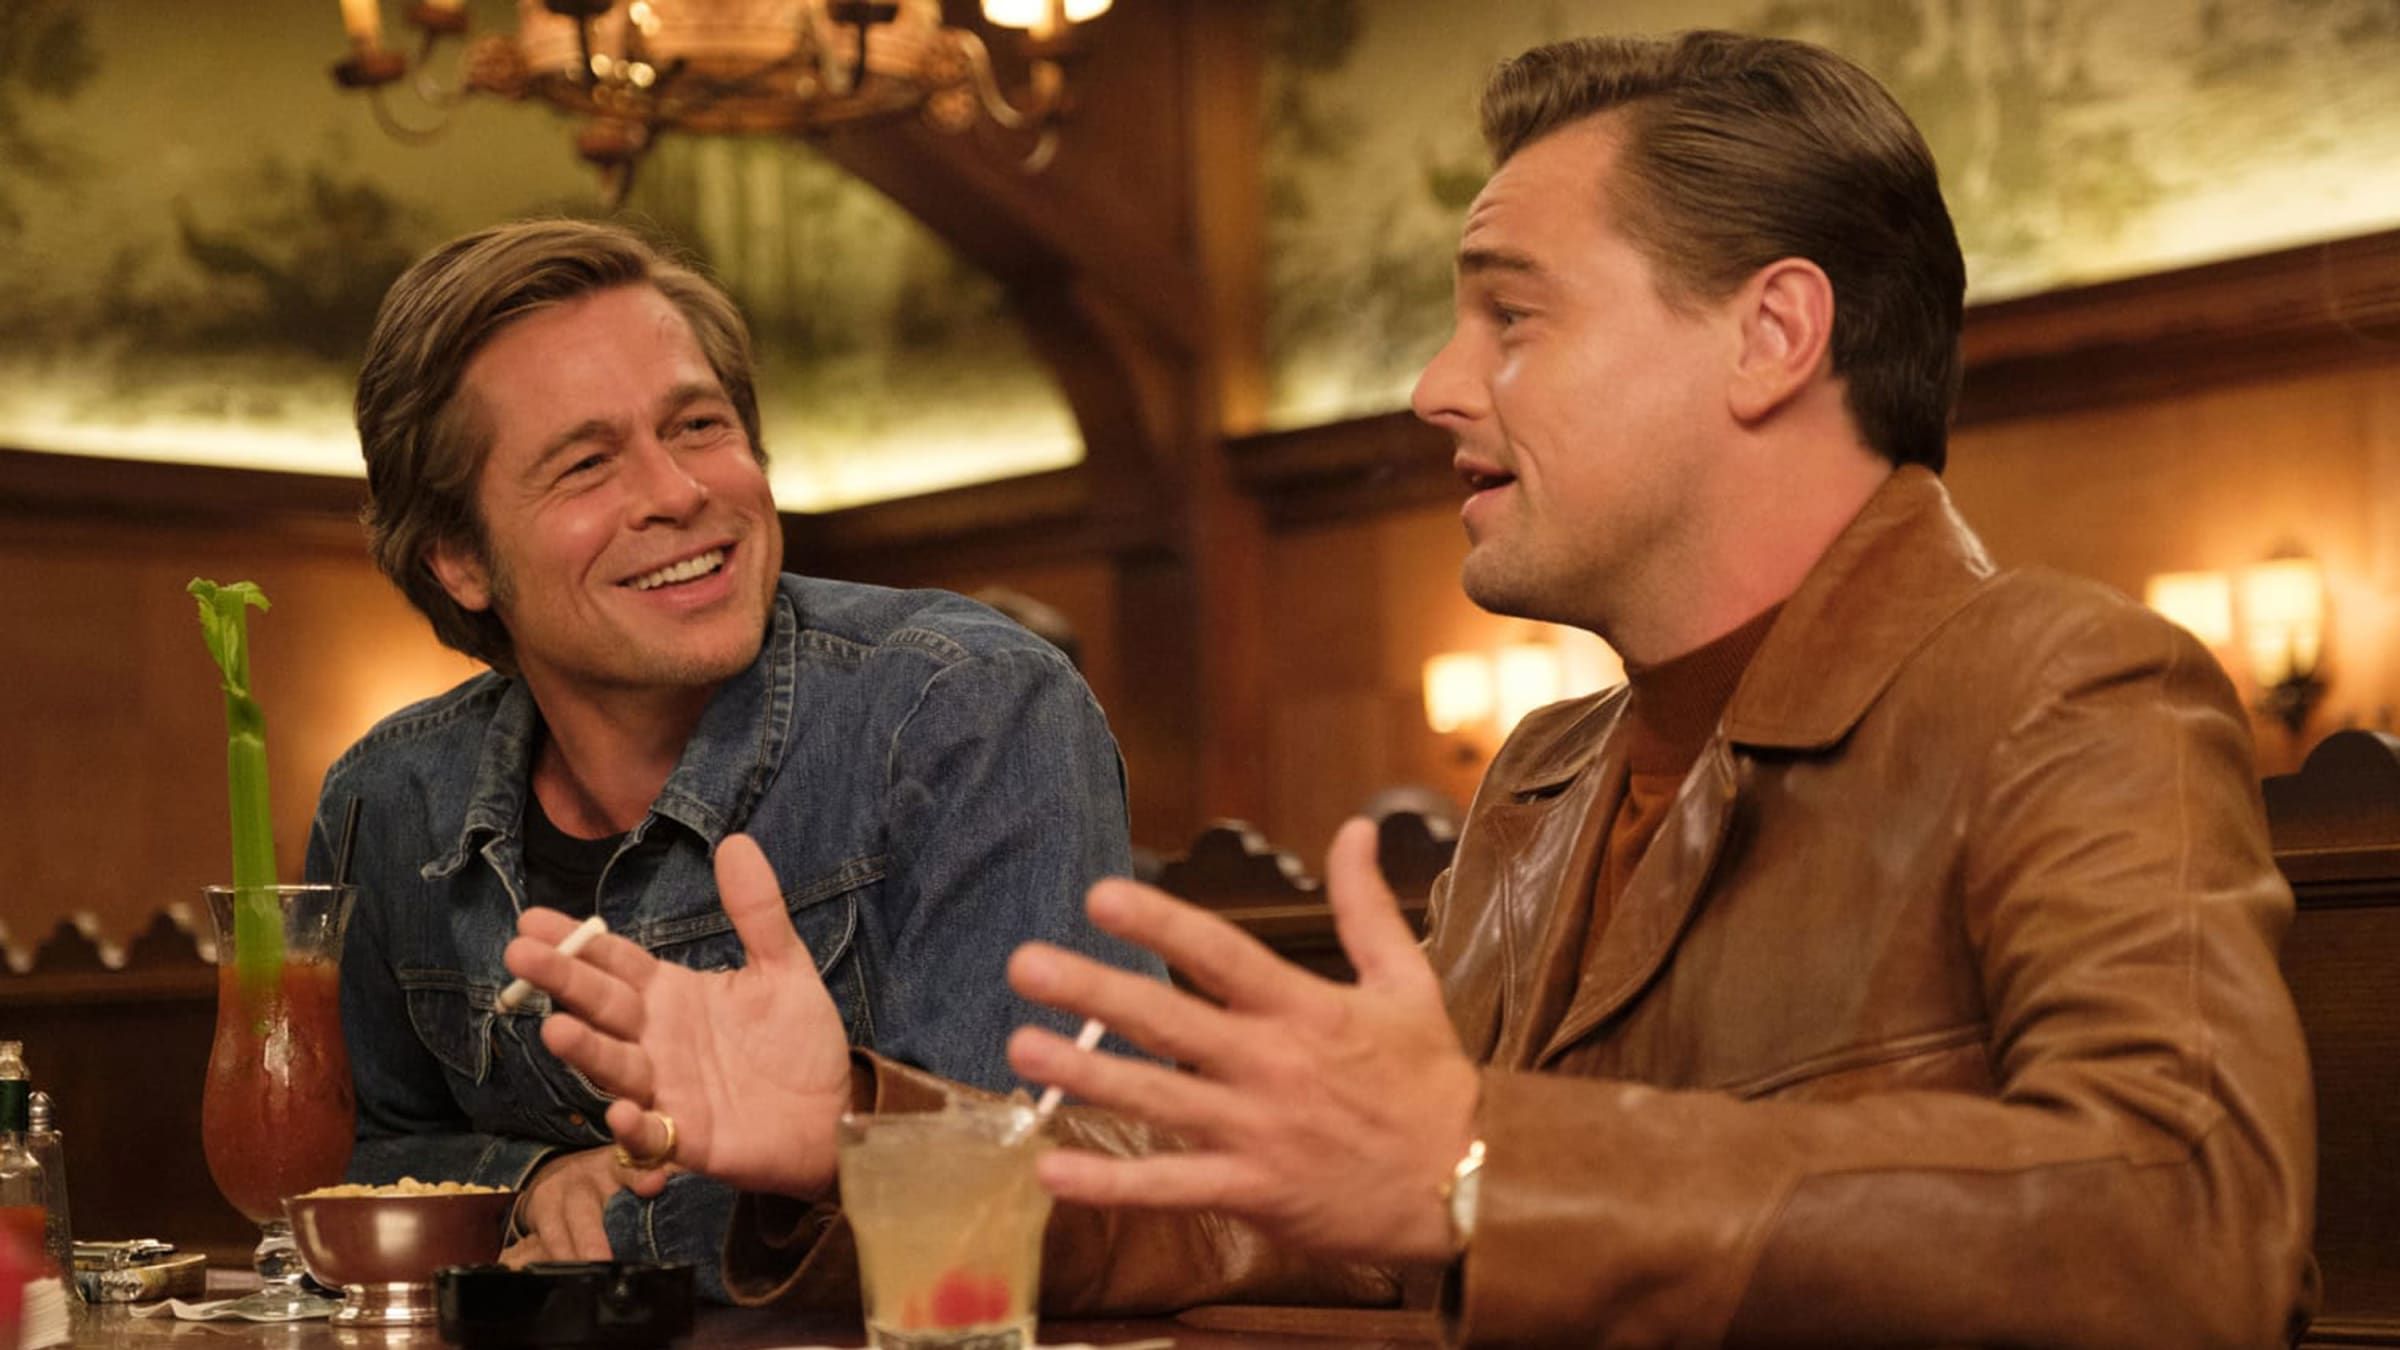 Did Brad Pitt wear any shoes in Once Upon A Time In Hollywood? - Quora